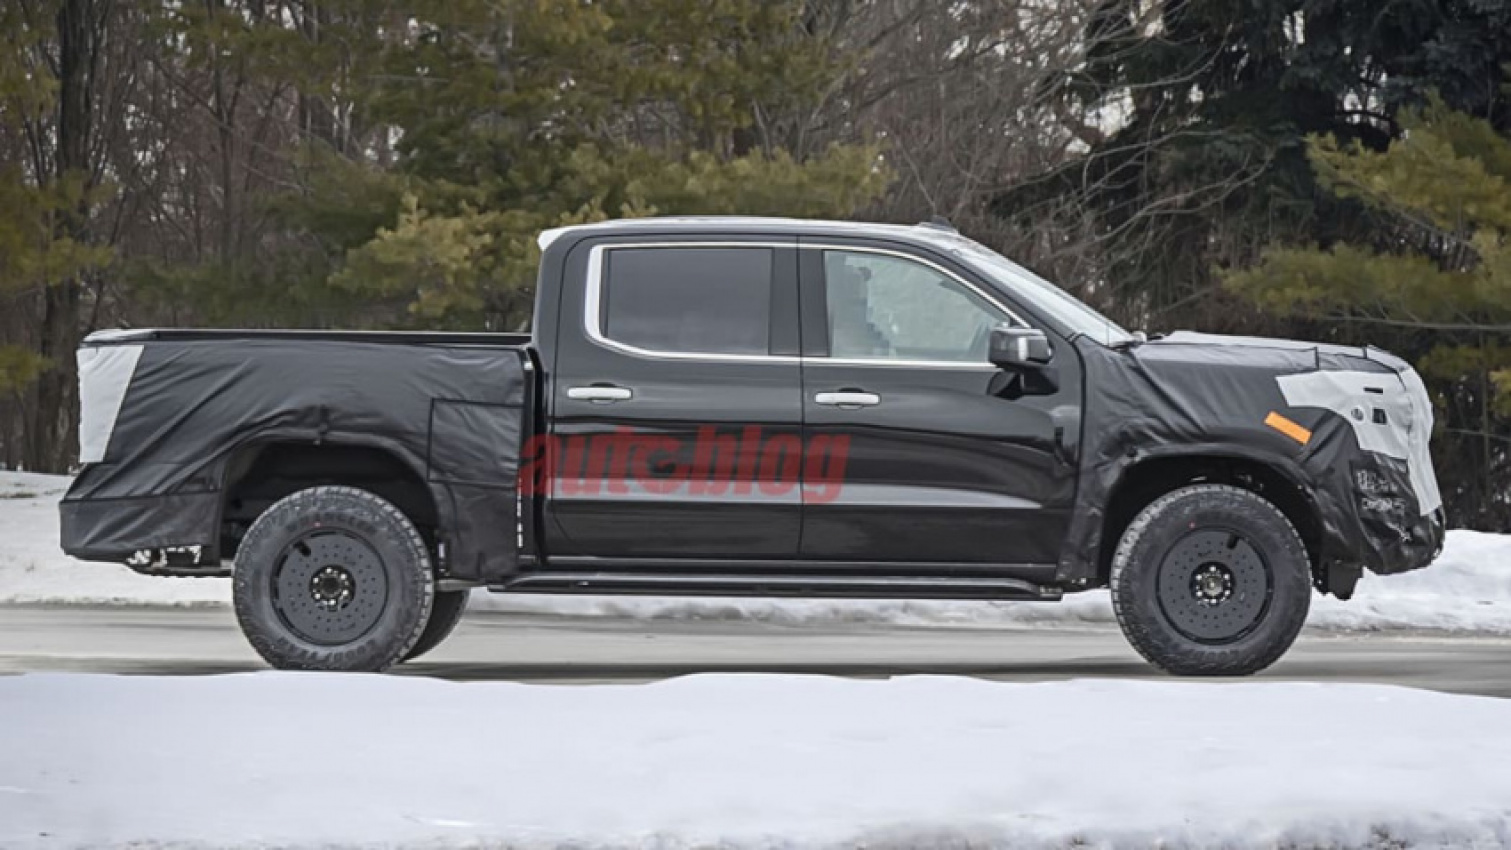 autos, cars, gmc, gmc sierra, off-road vehicles, spy photos, truck, gmc sierra spied with zr2-style off-road modifications